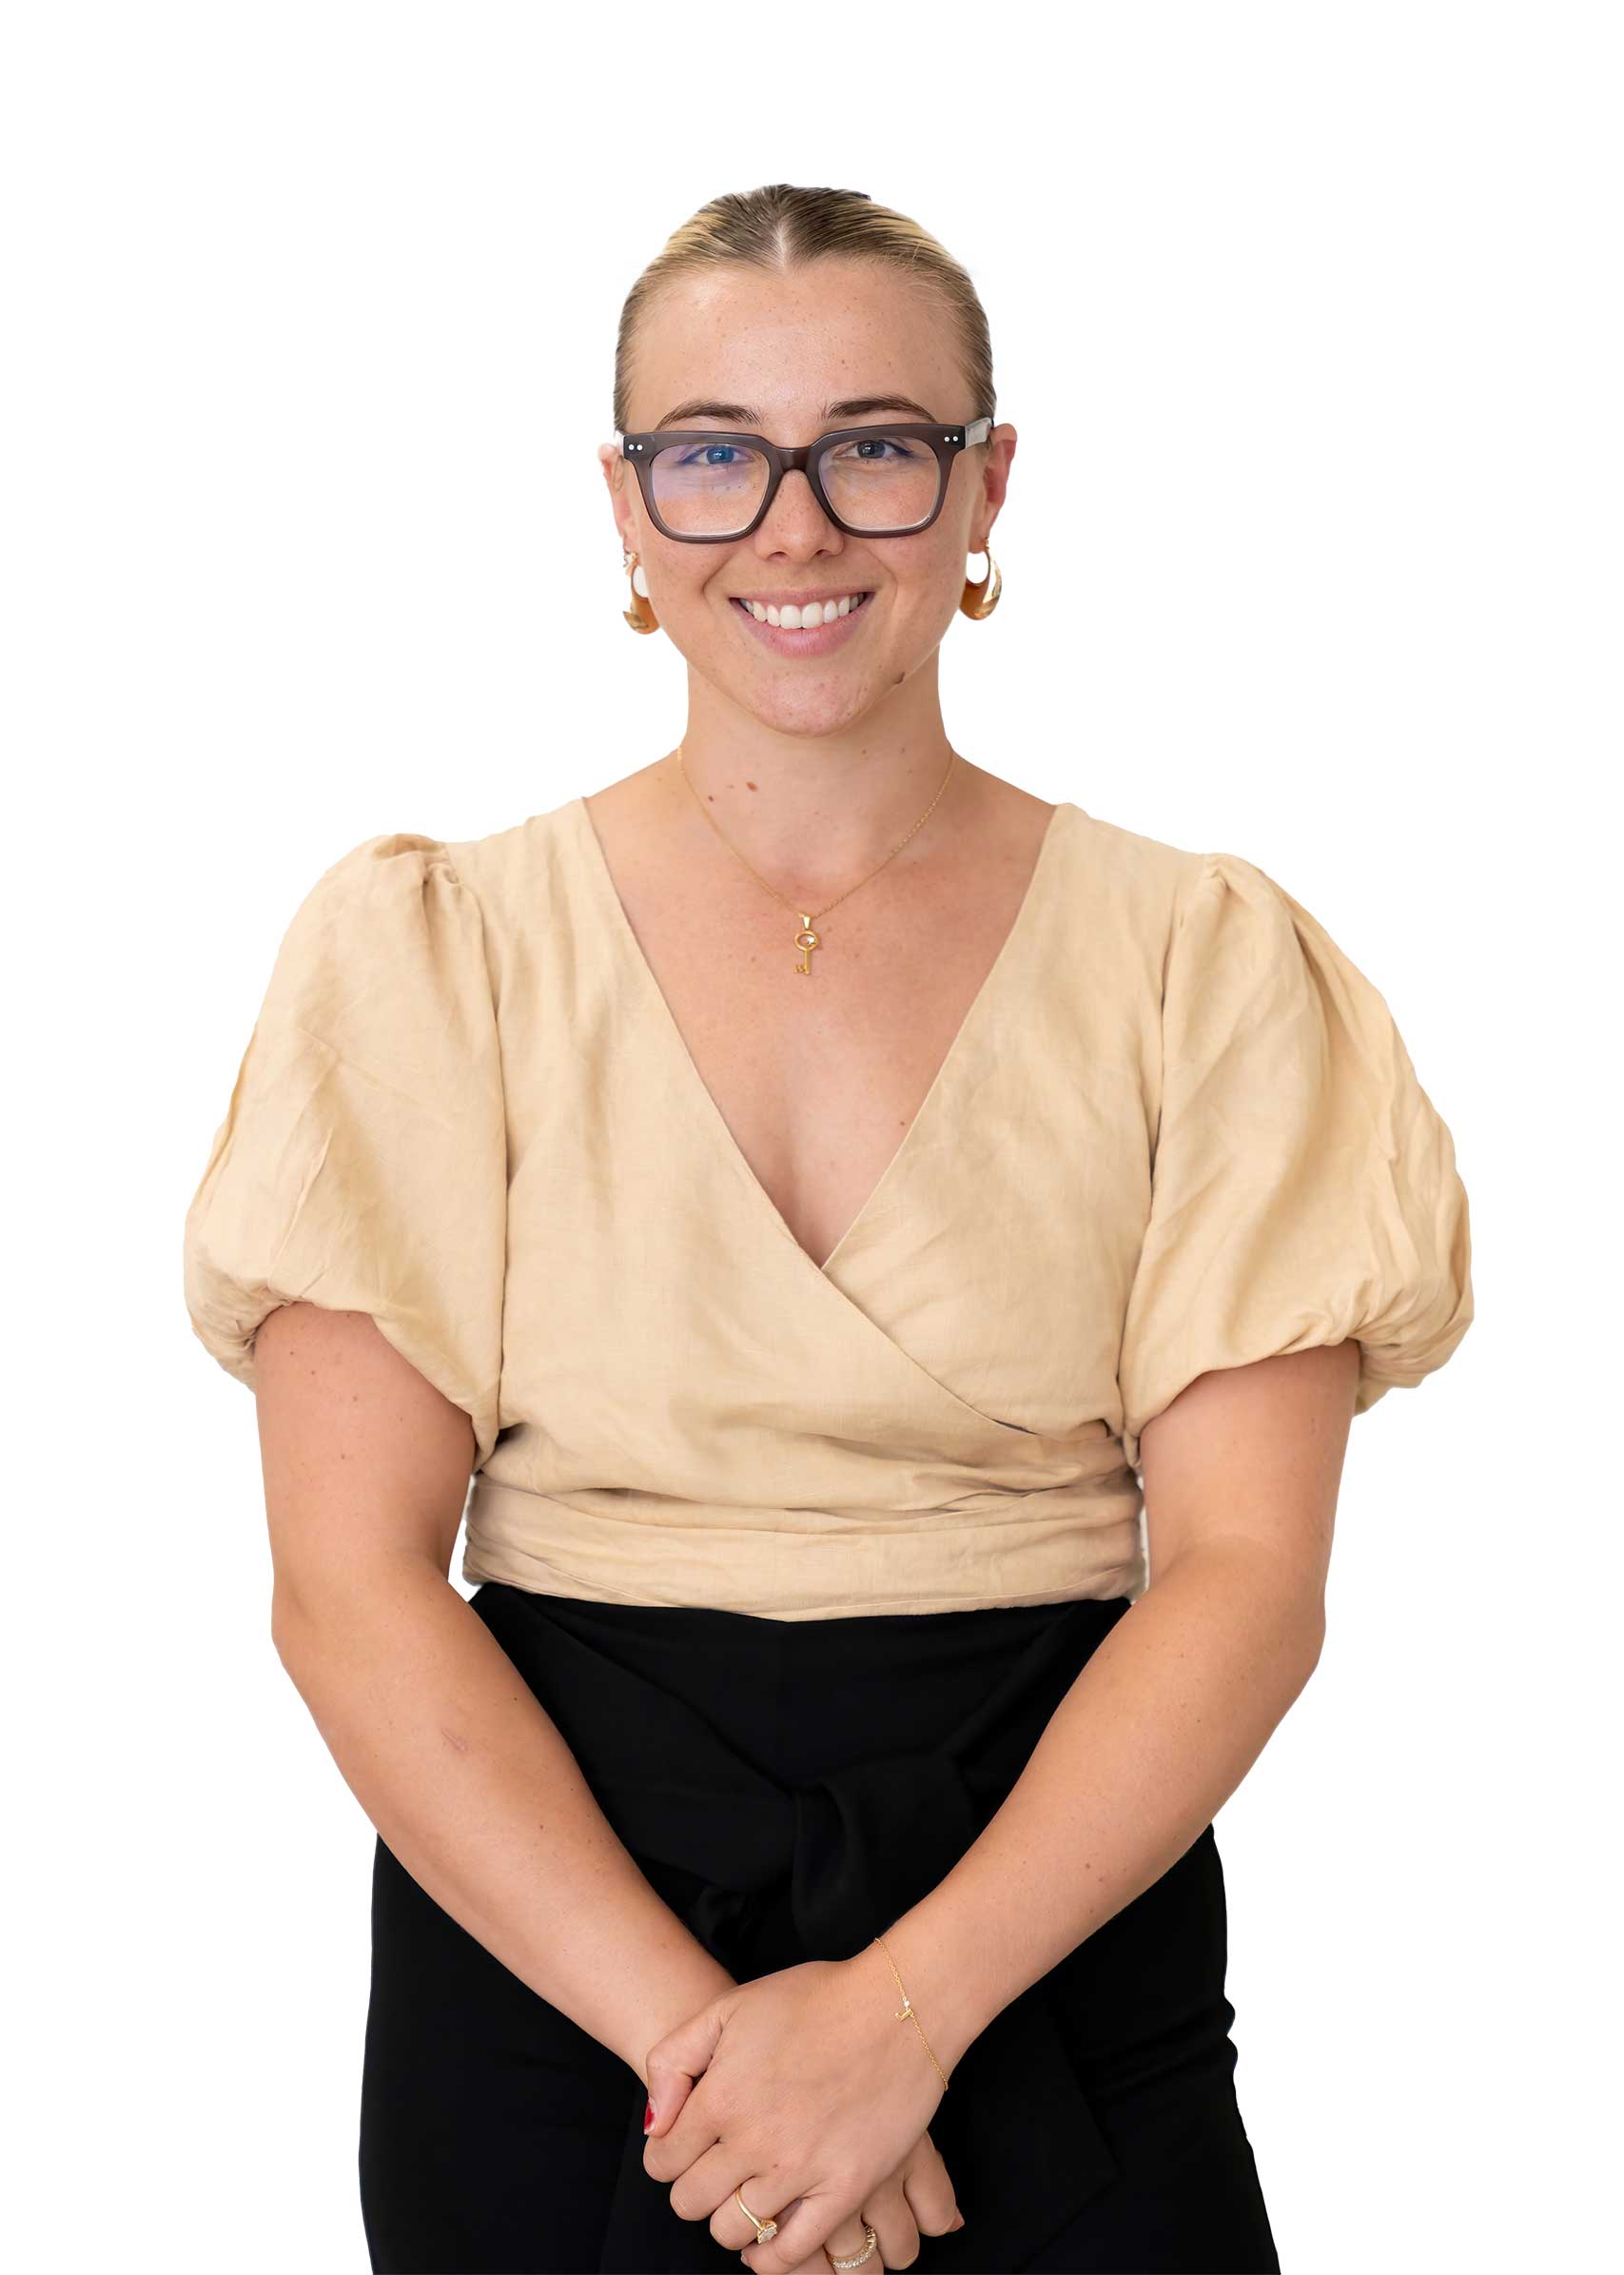 A smiling woman with blonde hair wearing glasses, a beige top, and black trousers, standing against a white background.